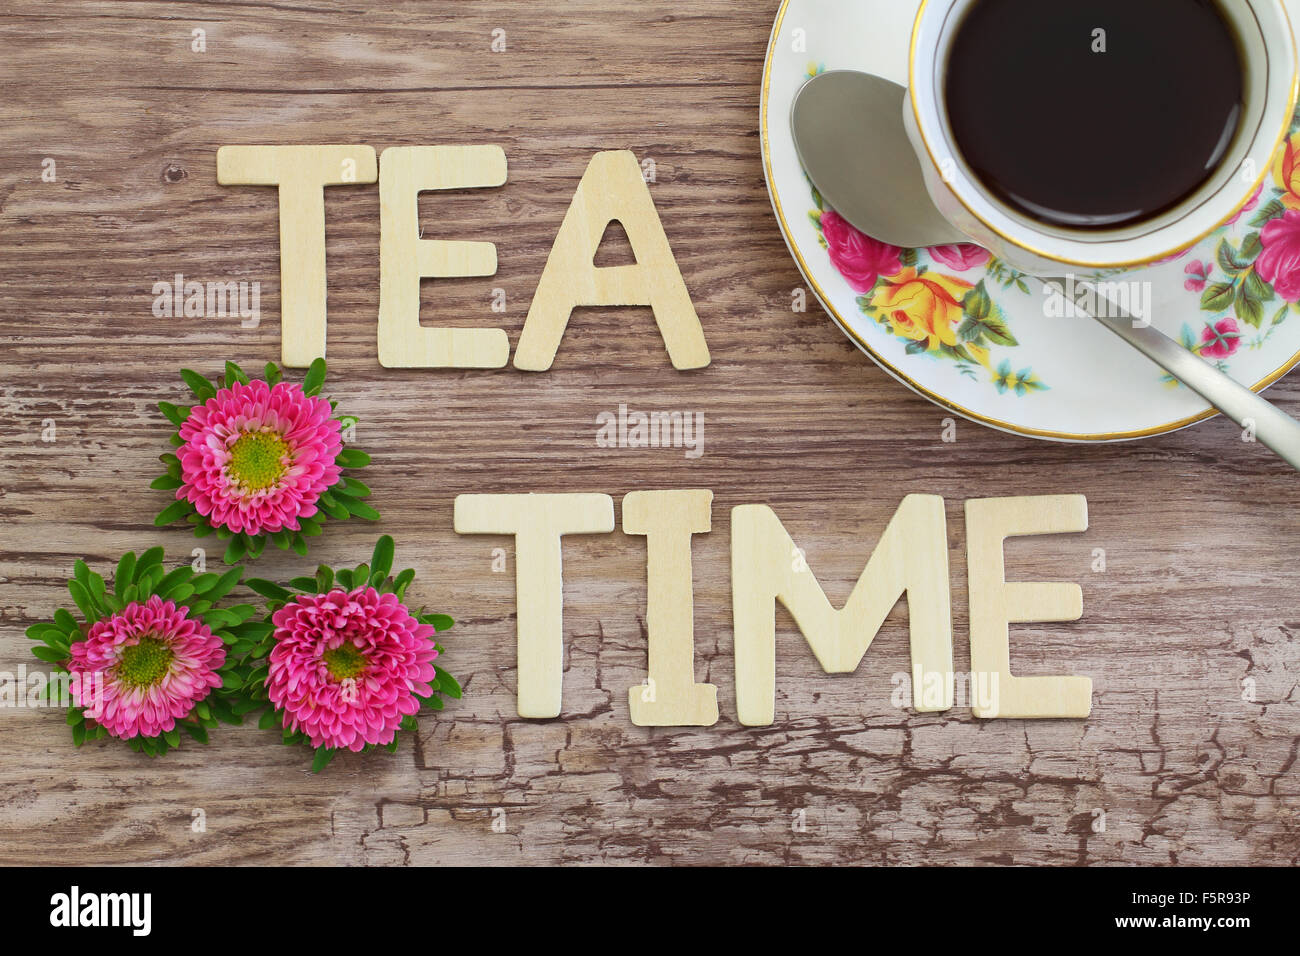 Tea time written with wooden letters on rustic surface Stock Photo